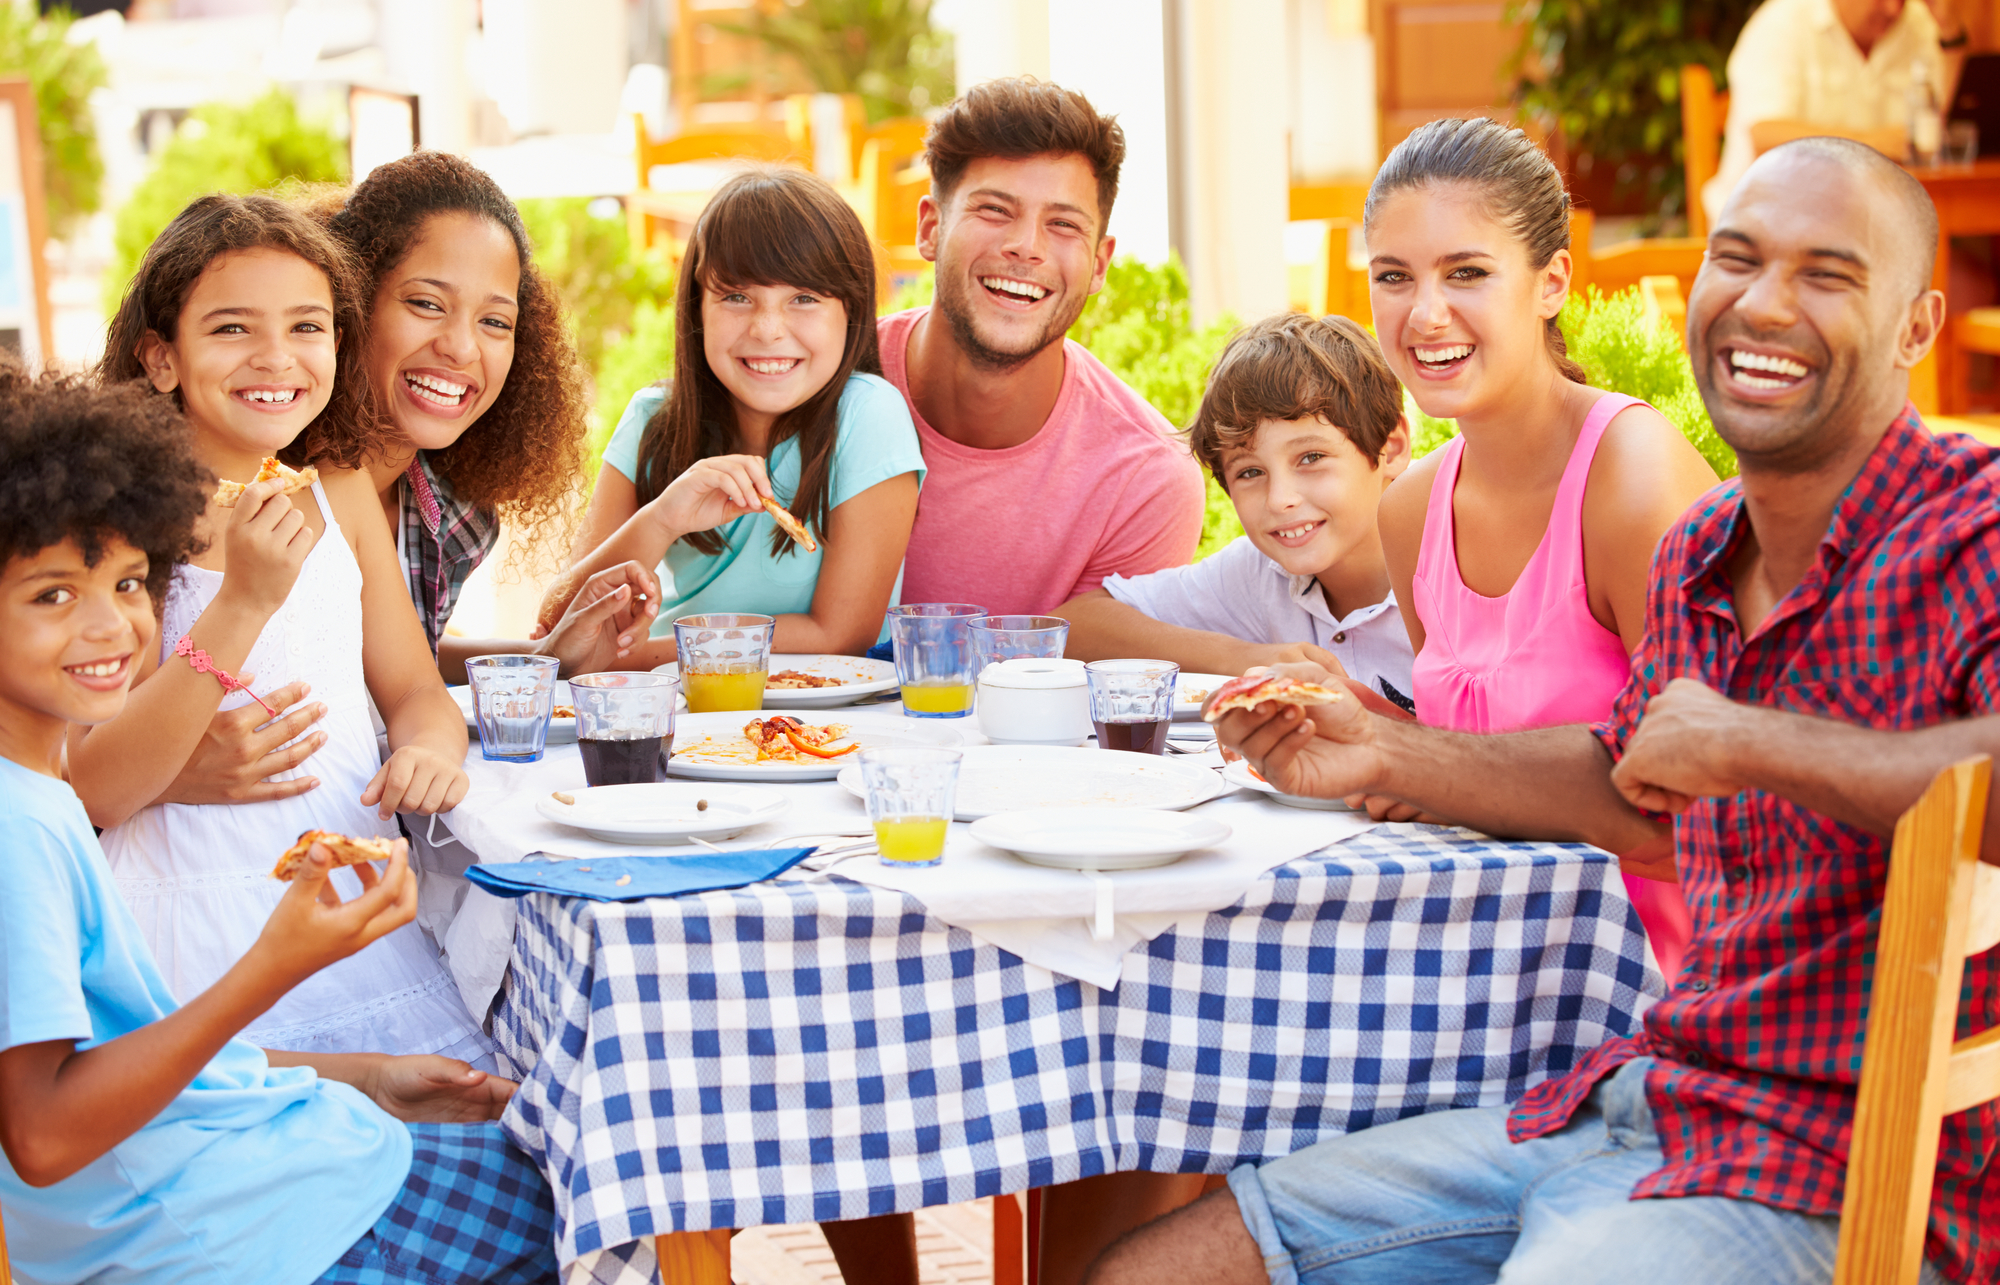 spend time with your family eating together